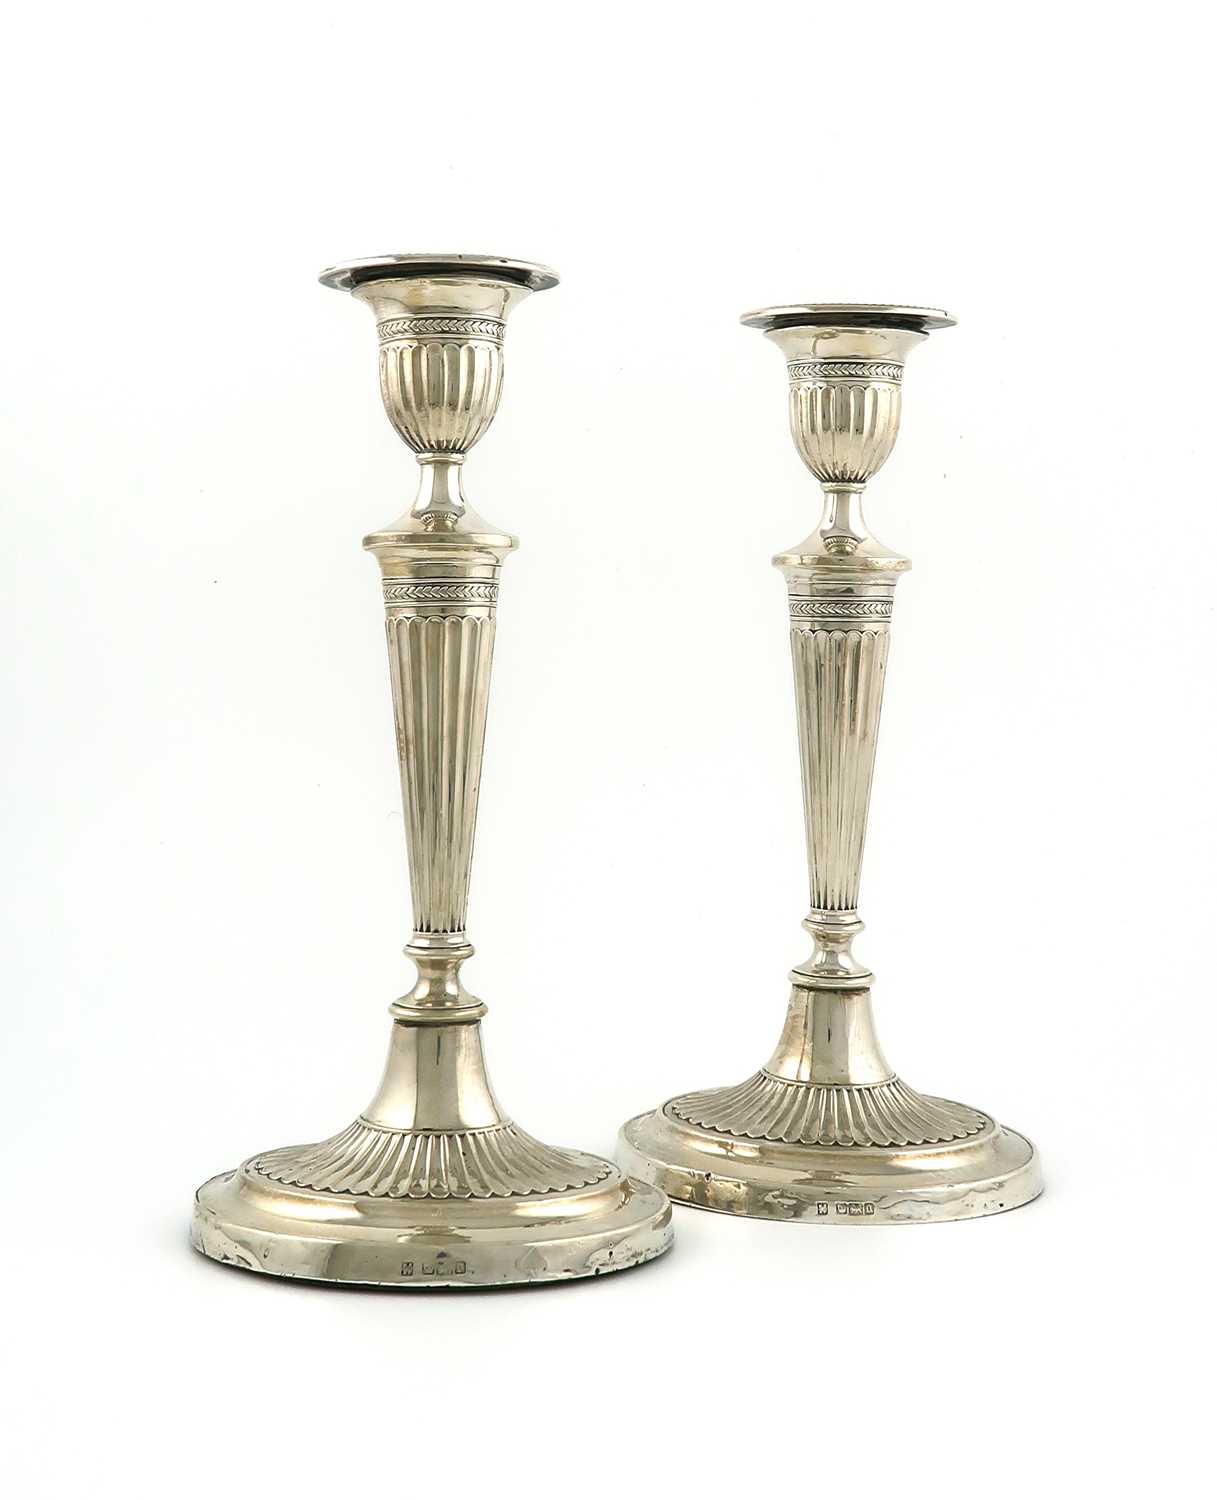 A pair of Edwardian silver candlesticks, by Fordham & Faulkner, Sheffield 1906, in the classical